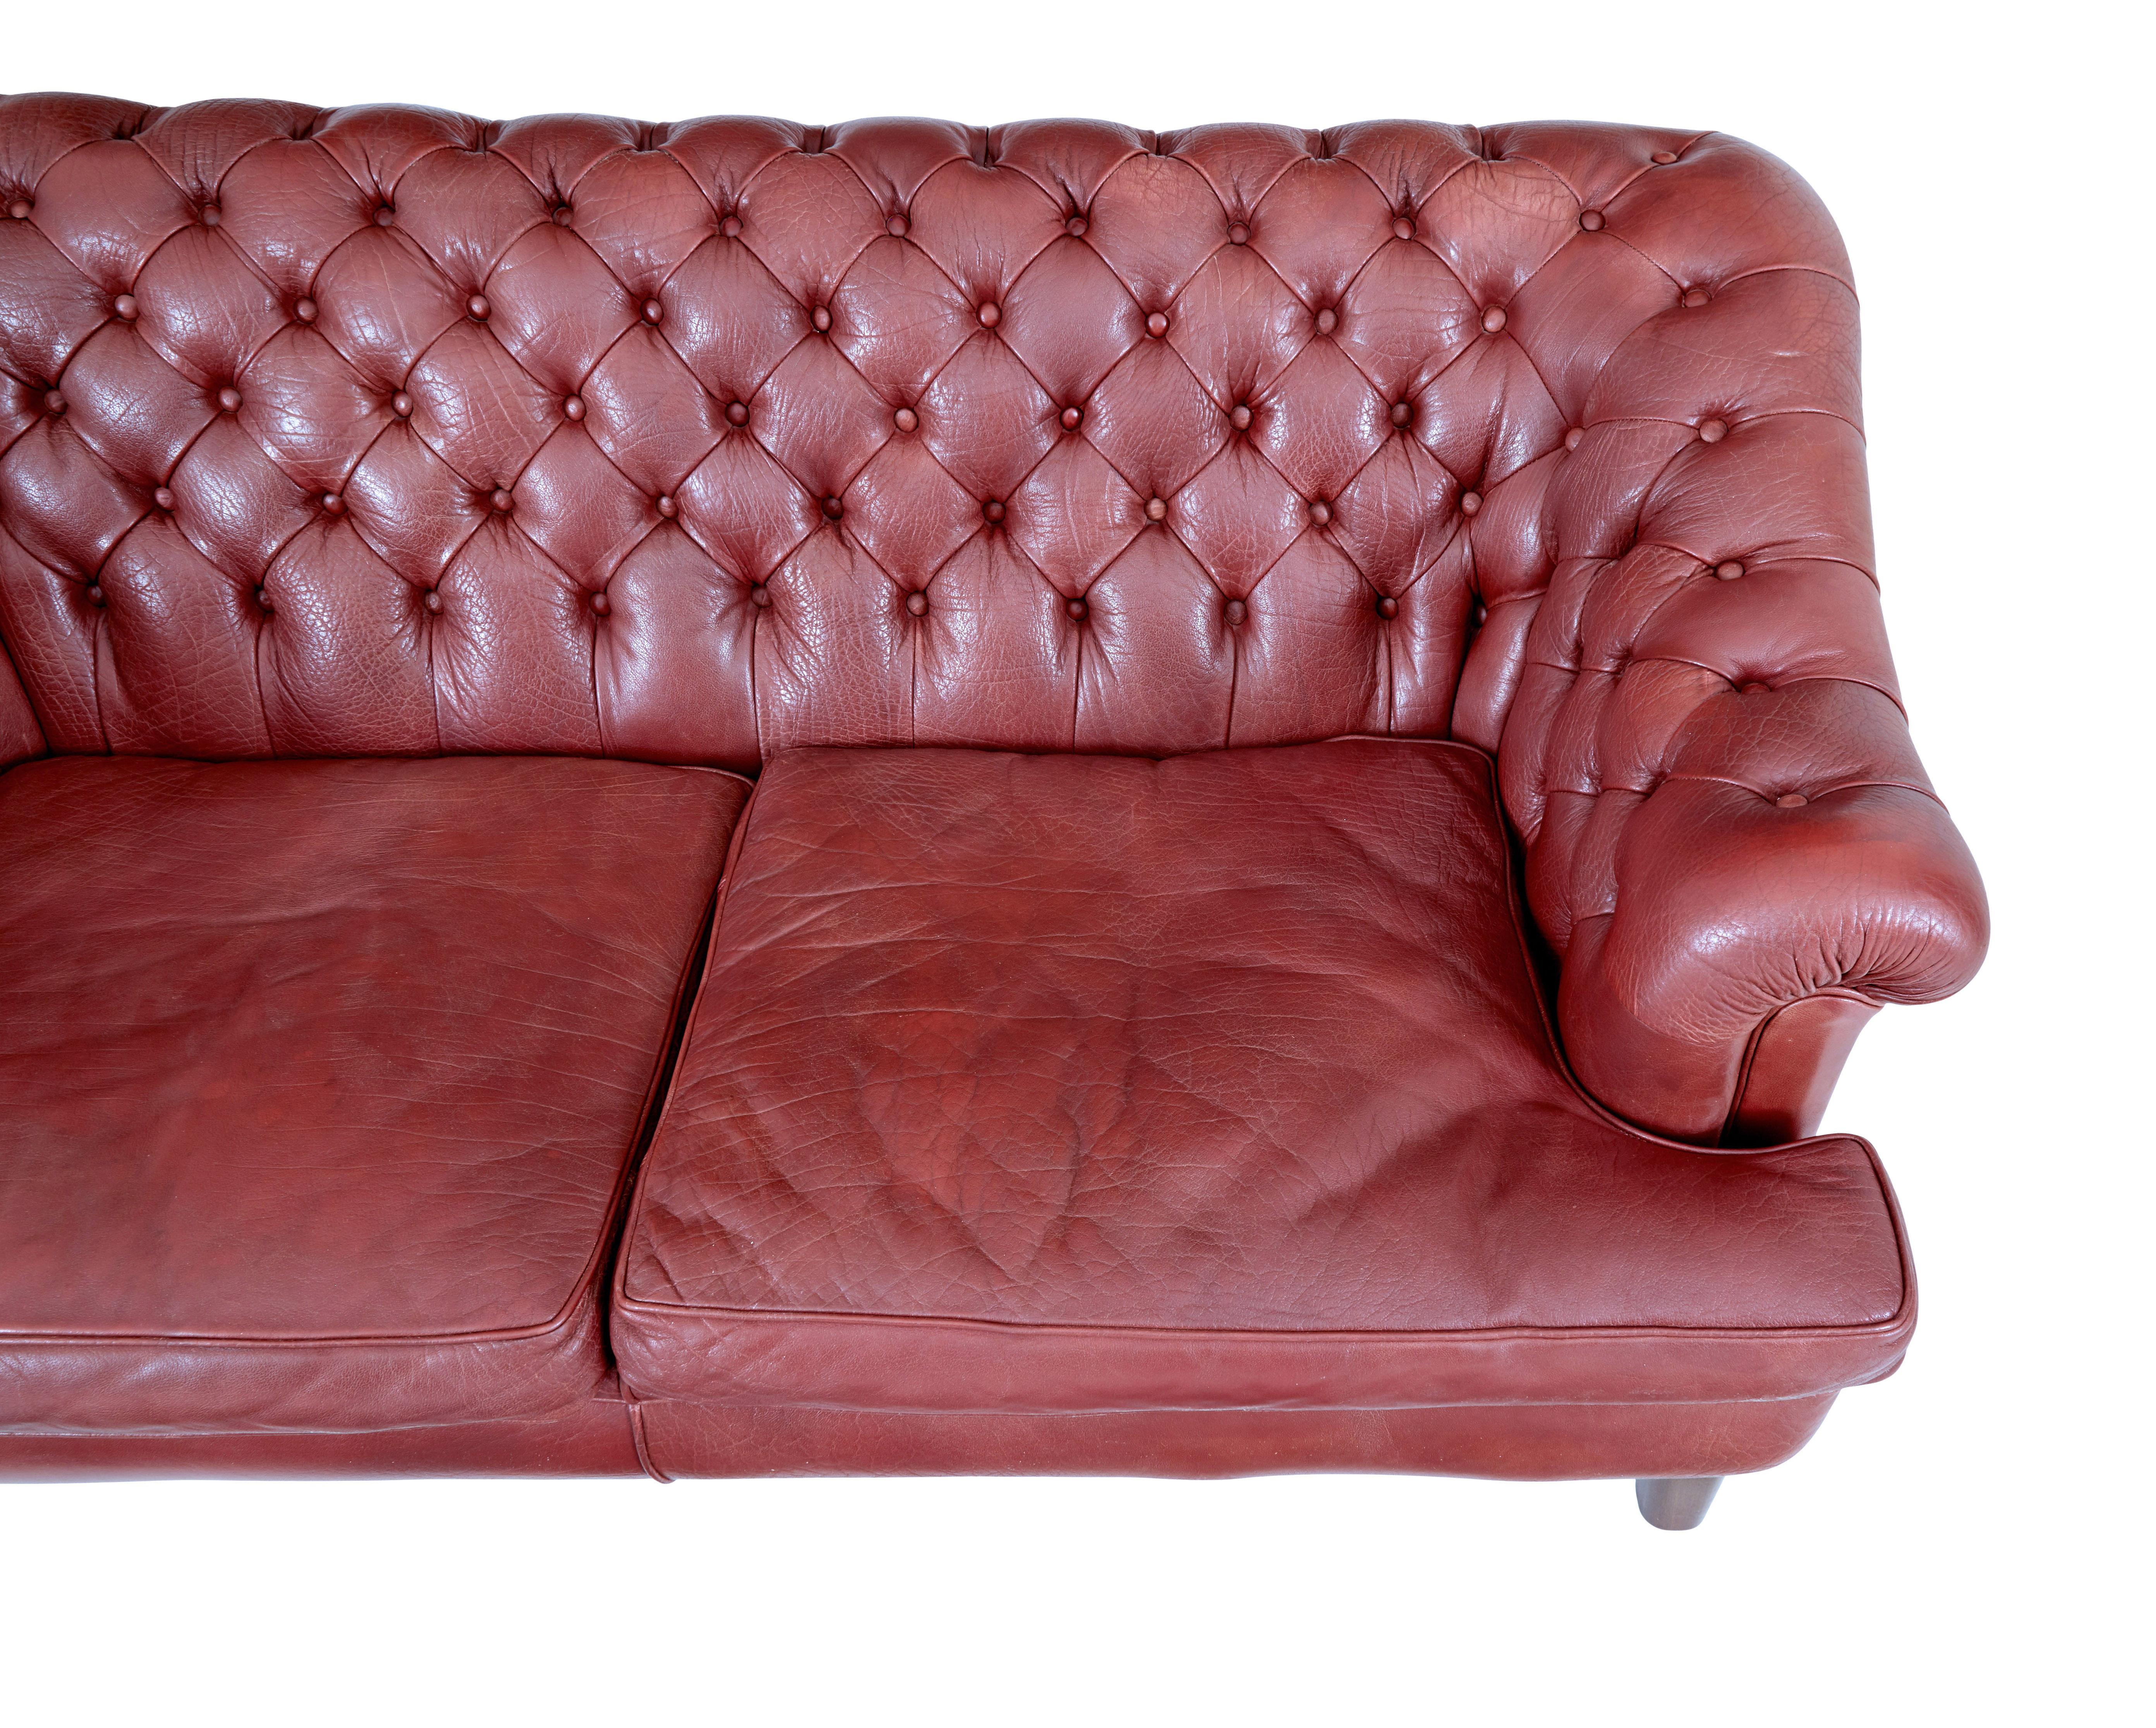 Leather Pair of mid 20th century leather Chesterfield sofas For Sale